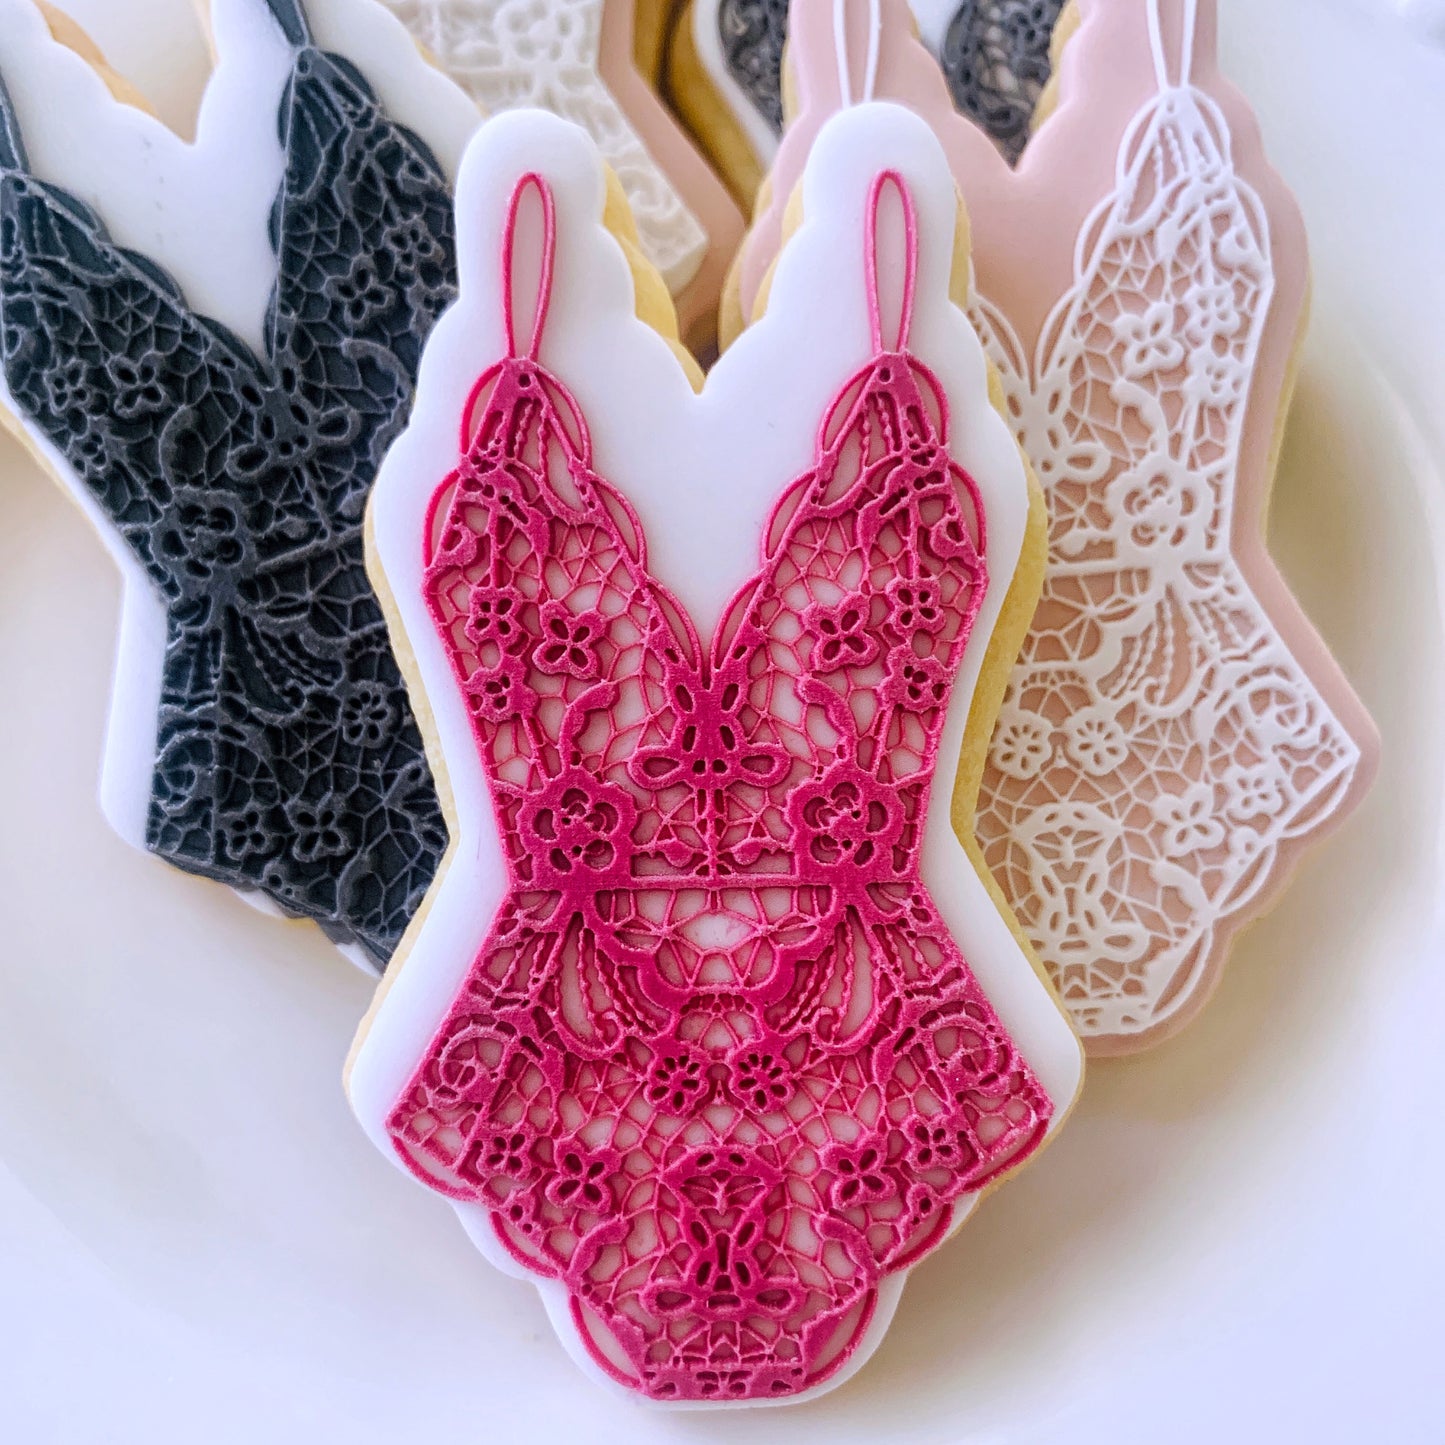 Lace Lingerie Cookie Stamp & Cutter